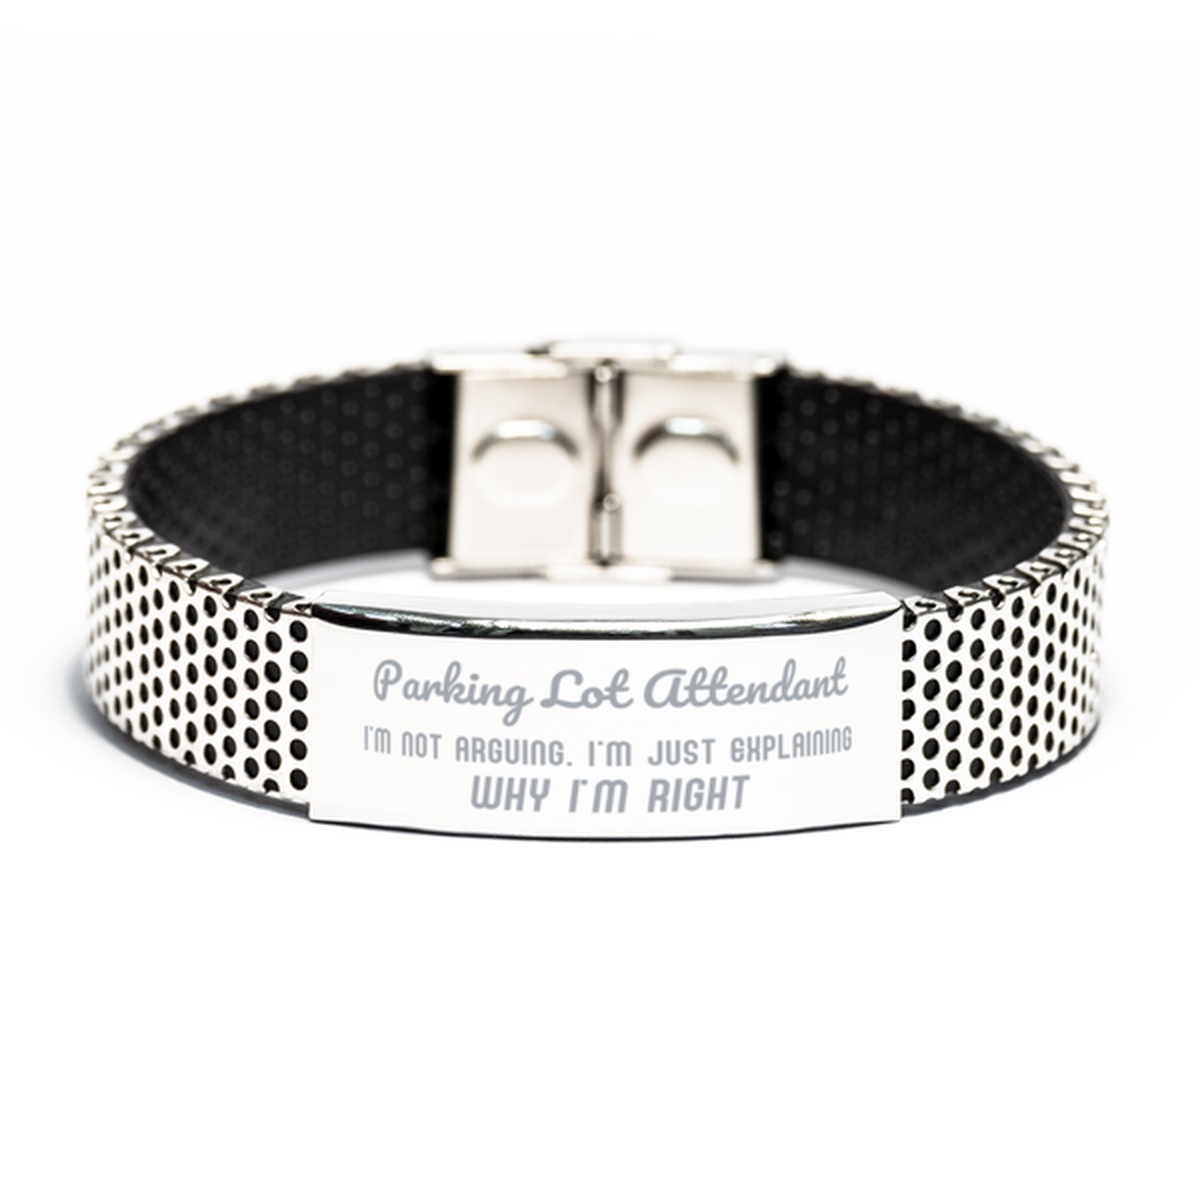 Parking Lot Attendant I'm not Arguing. I'm Just Explaining Why I'm RIGHT Stainless Steel Bracelet, Funny Saying Quote Parking Lot Attendant Gifts For Parking Lot Attendant Graduation Birthday Christmas Gifts for Men Women Coworker